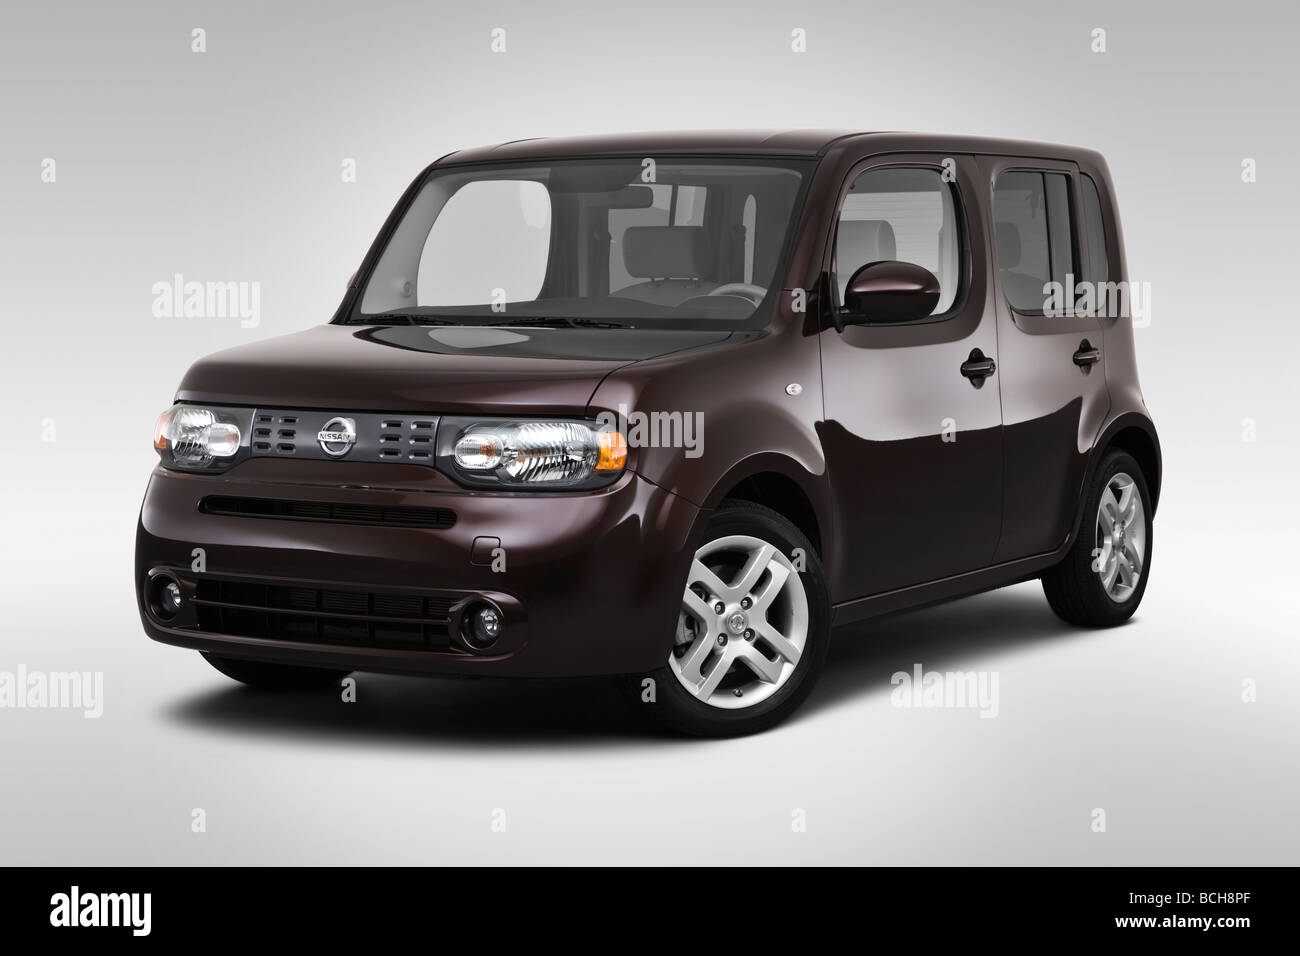 2009 Nissan Cube 1.8 SL  in Gray - Front angle view Stock Photo